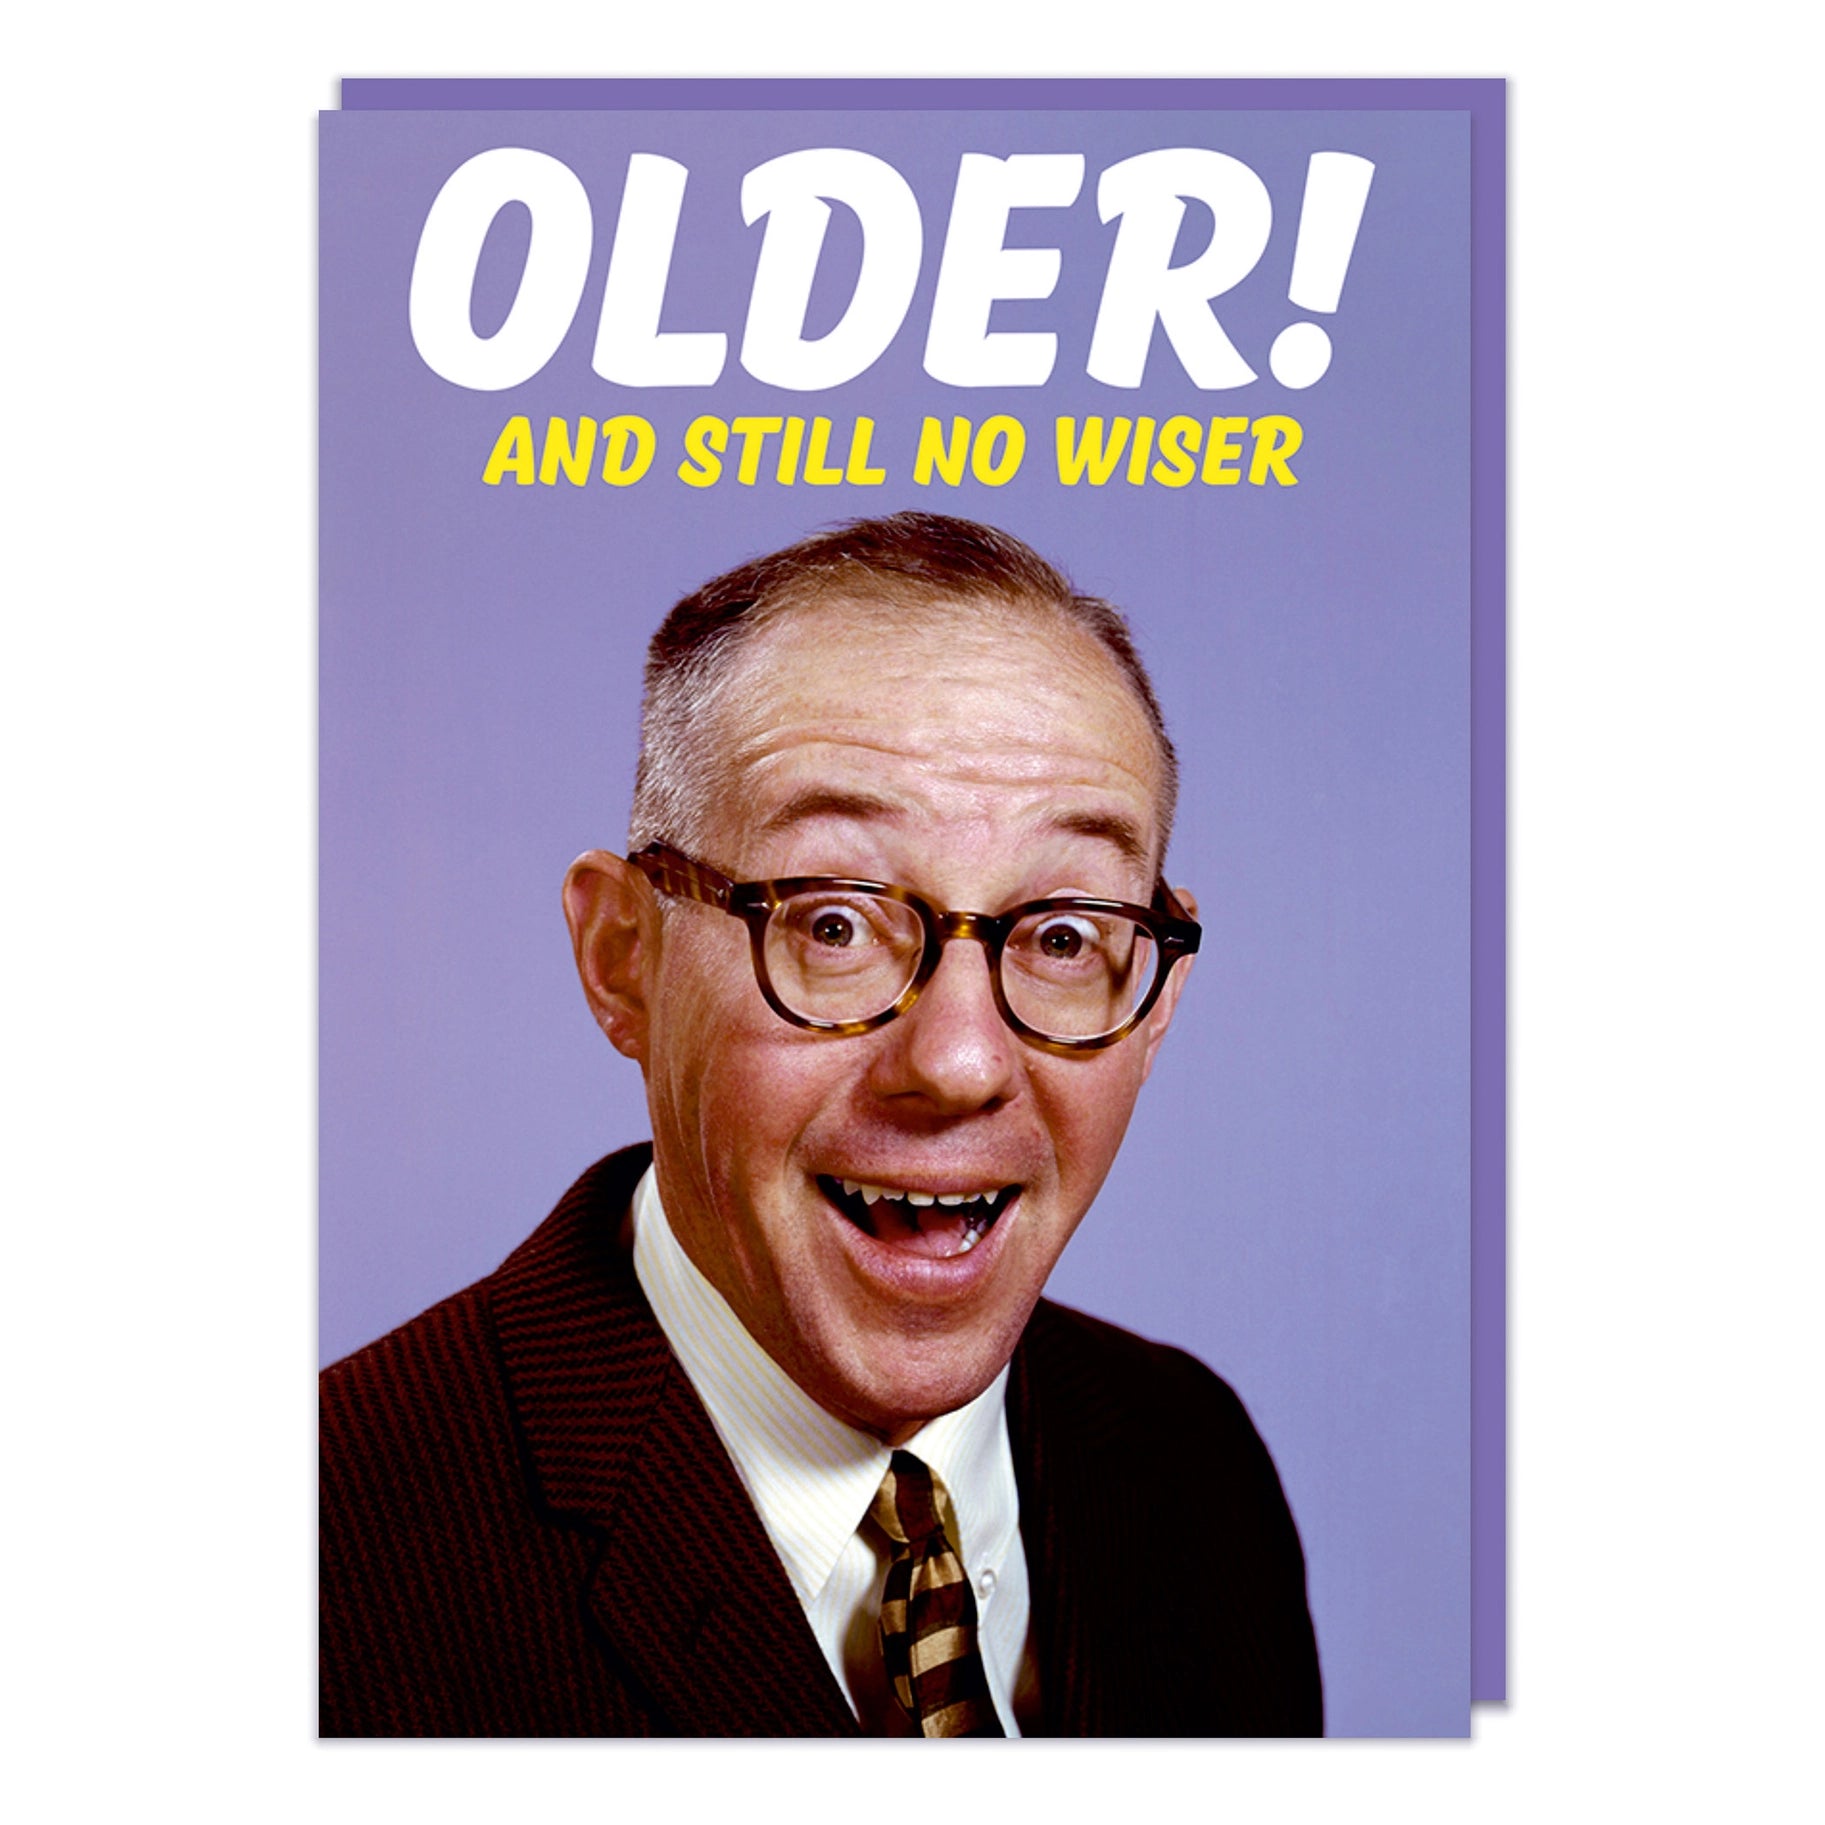 Older! And Still Not Wiser - Birthday Greeting Card - Mellow Monkey